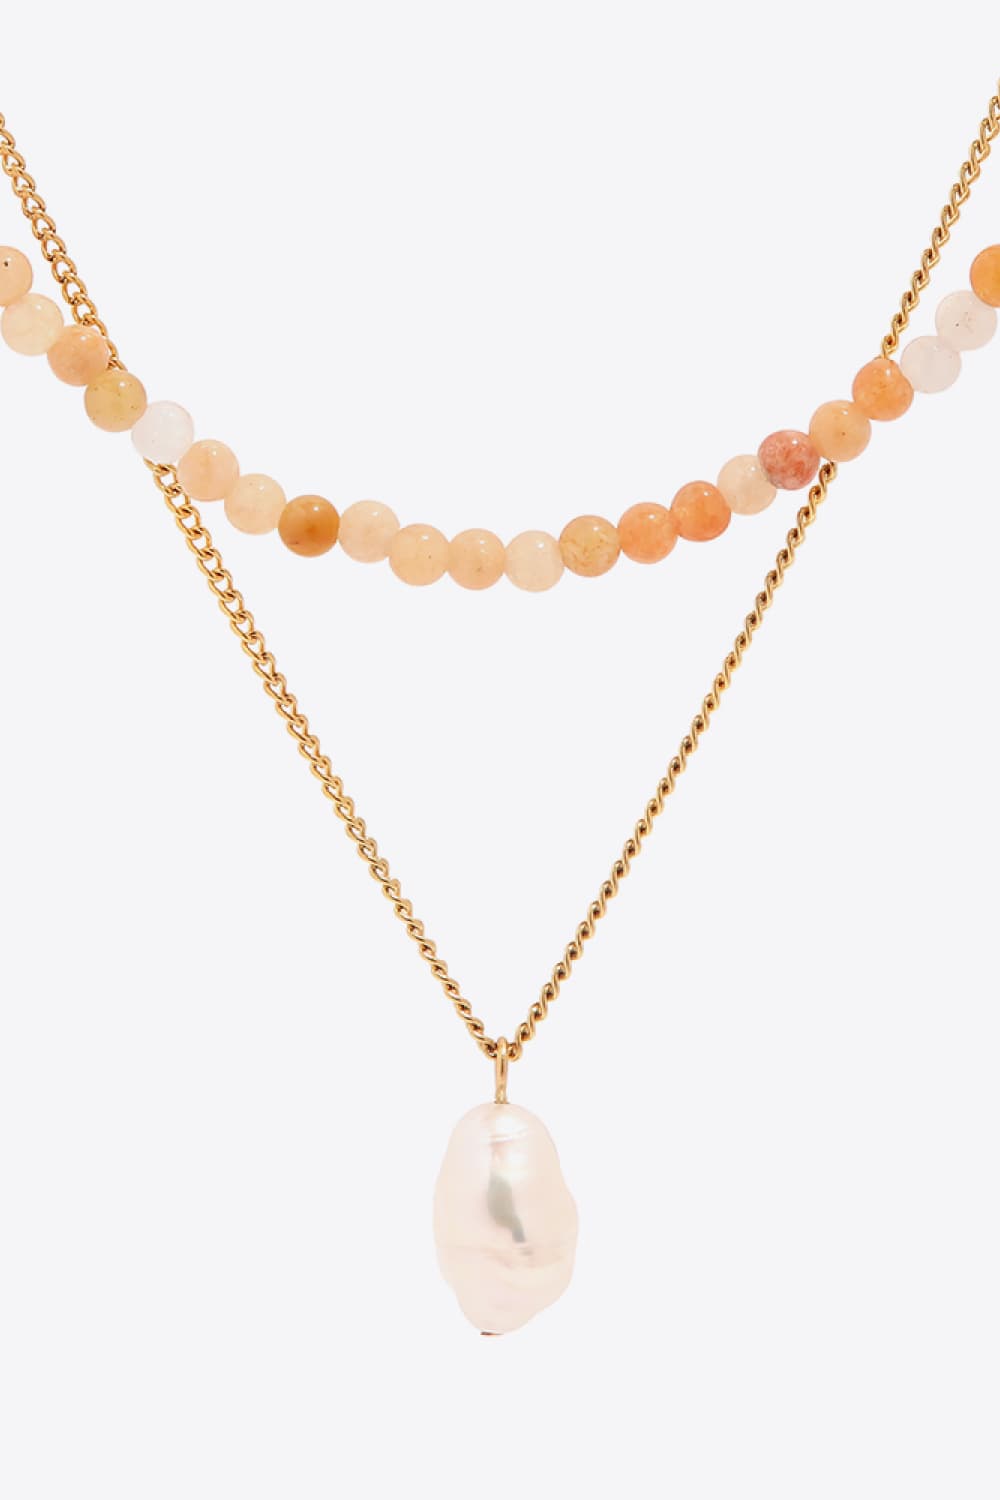 GOLD ONE SIZE - Double-Layered Freshwater Pearl Pendant Necklace - necklace at TFC&H Co.